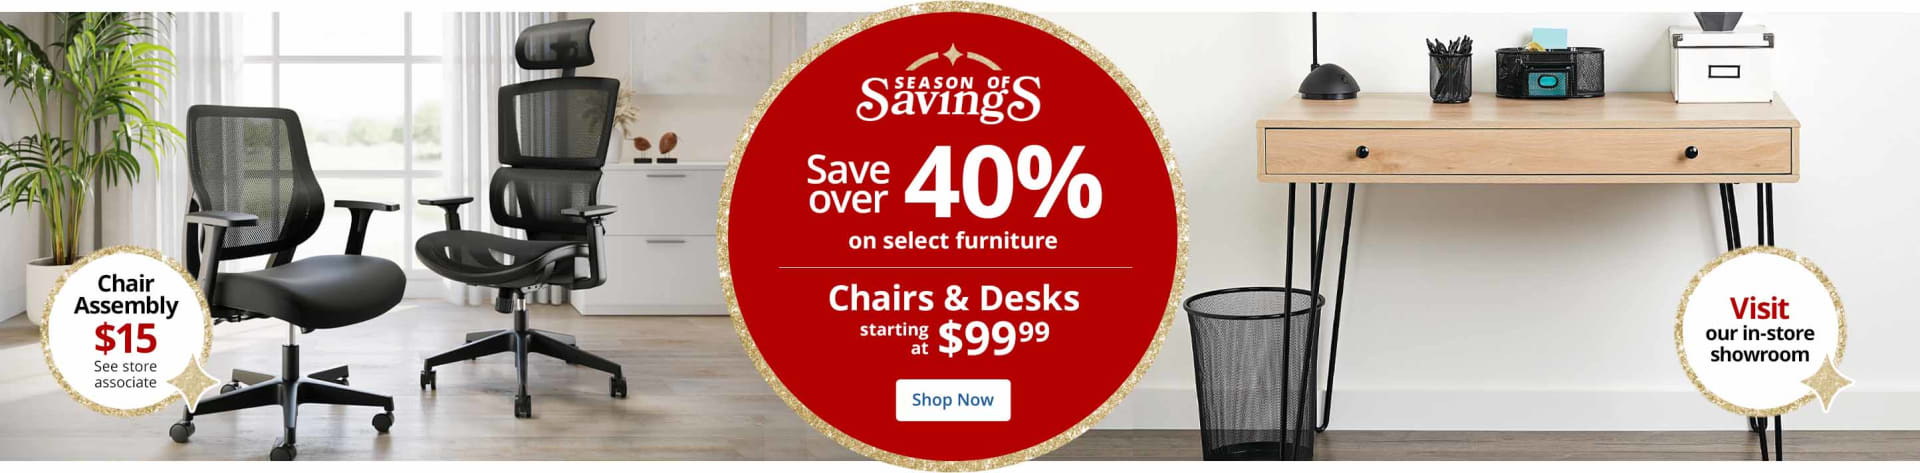 Save over 40% on select furniture